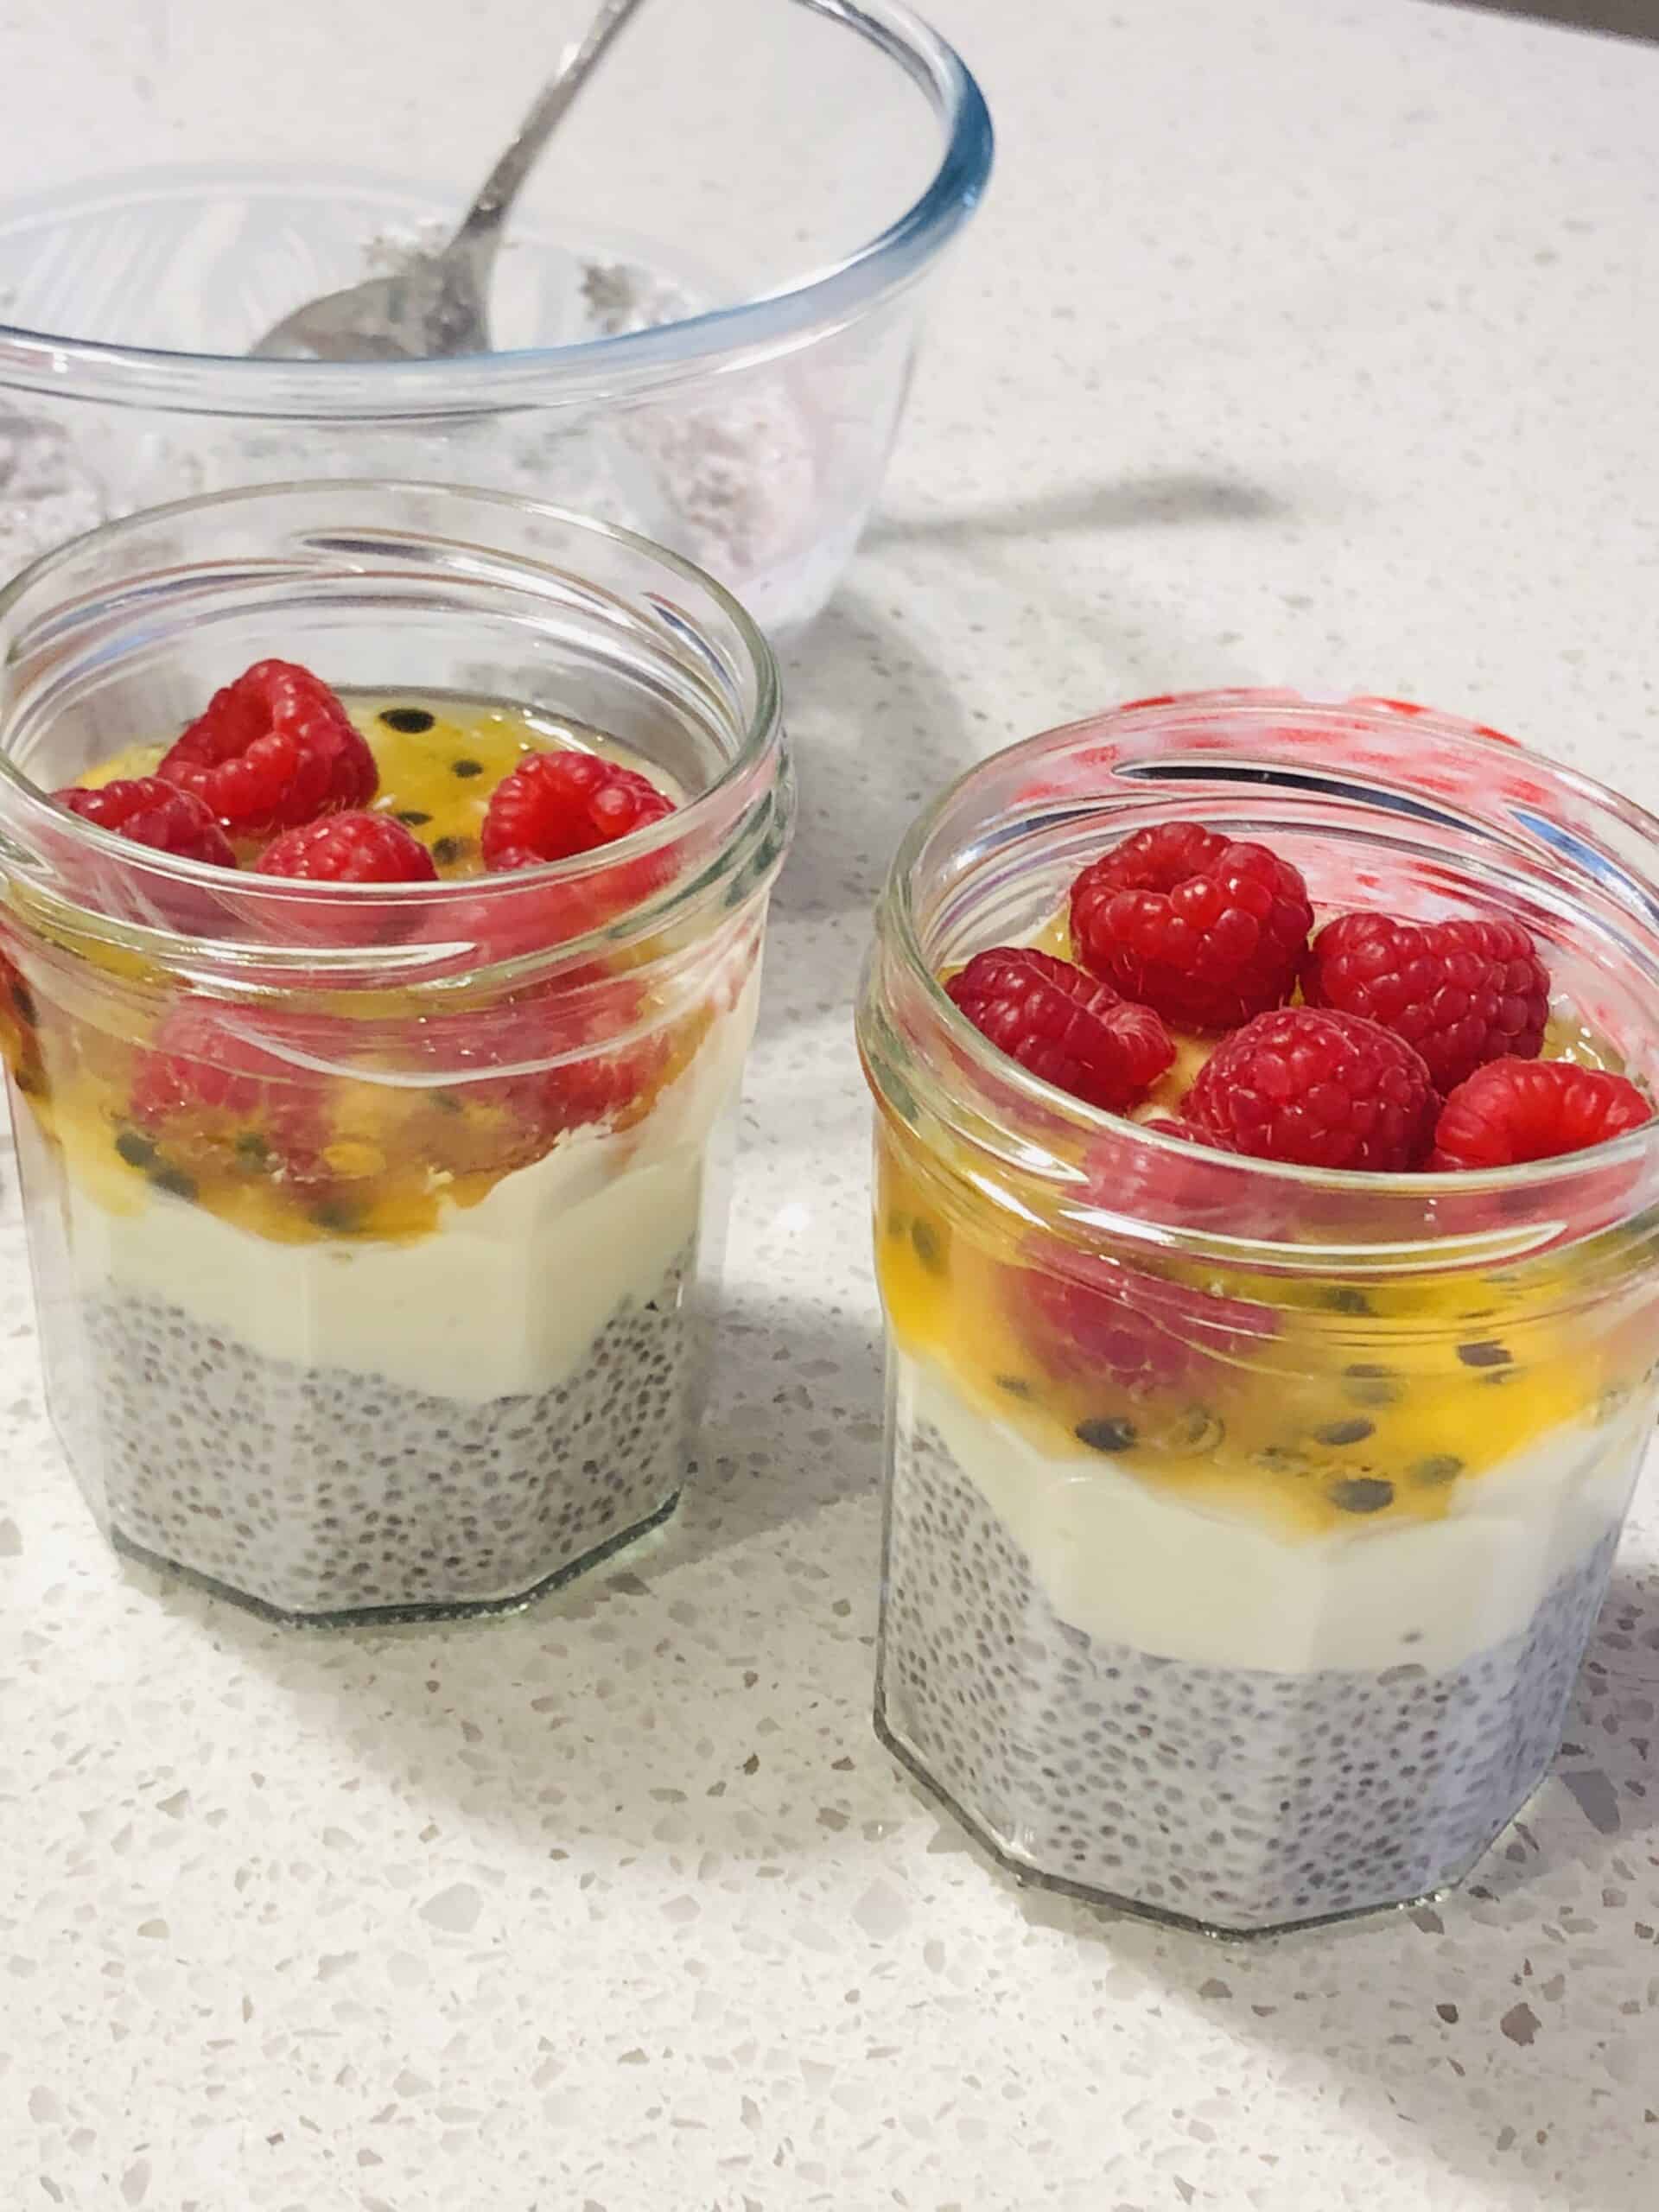 Chia Pudding Pots that are easy to Grab-and-Go - Melt Nutrition